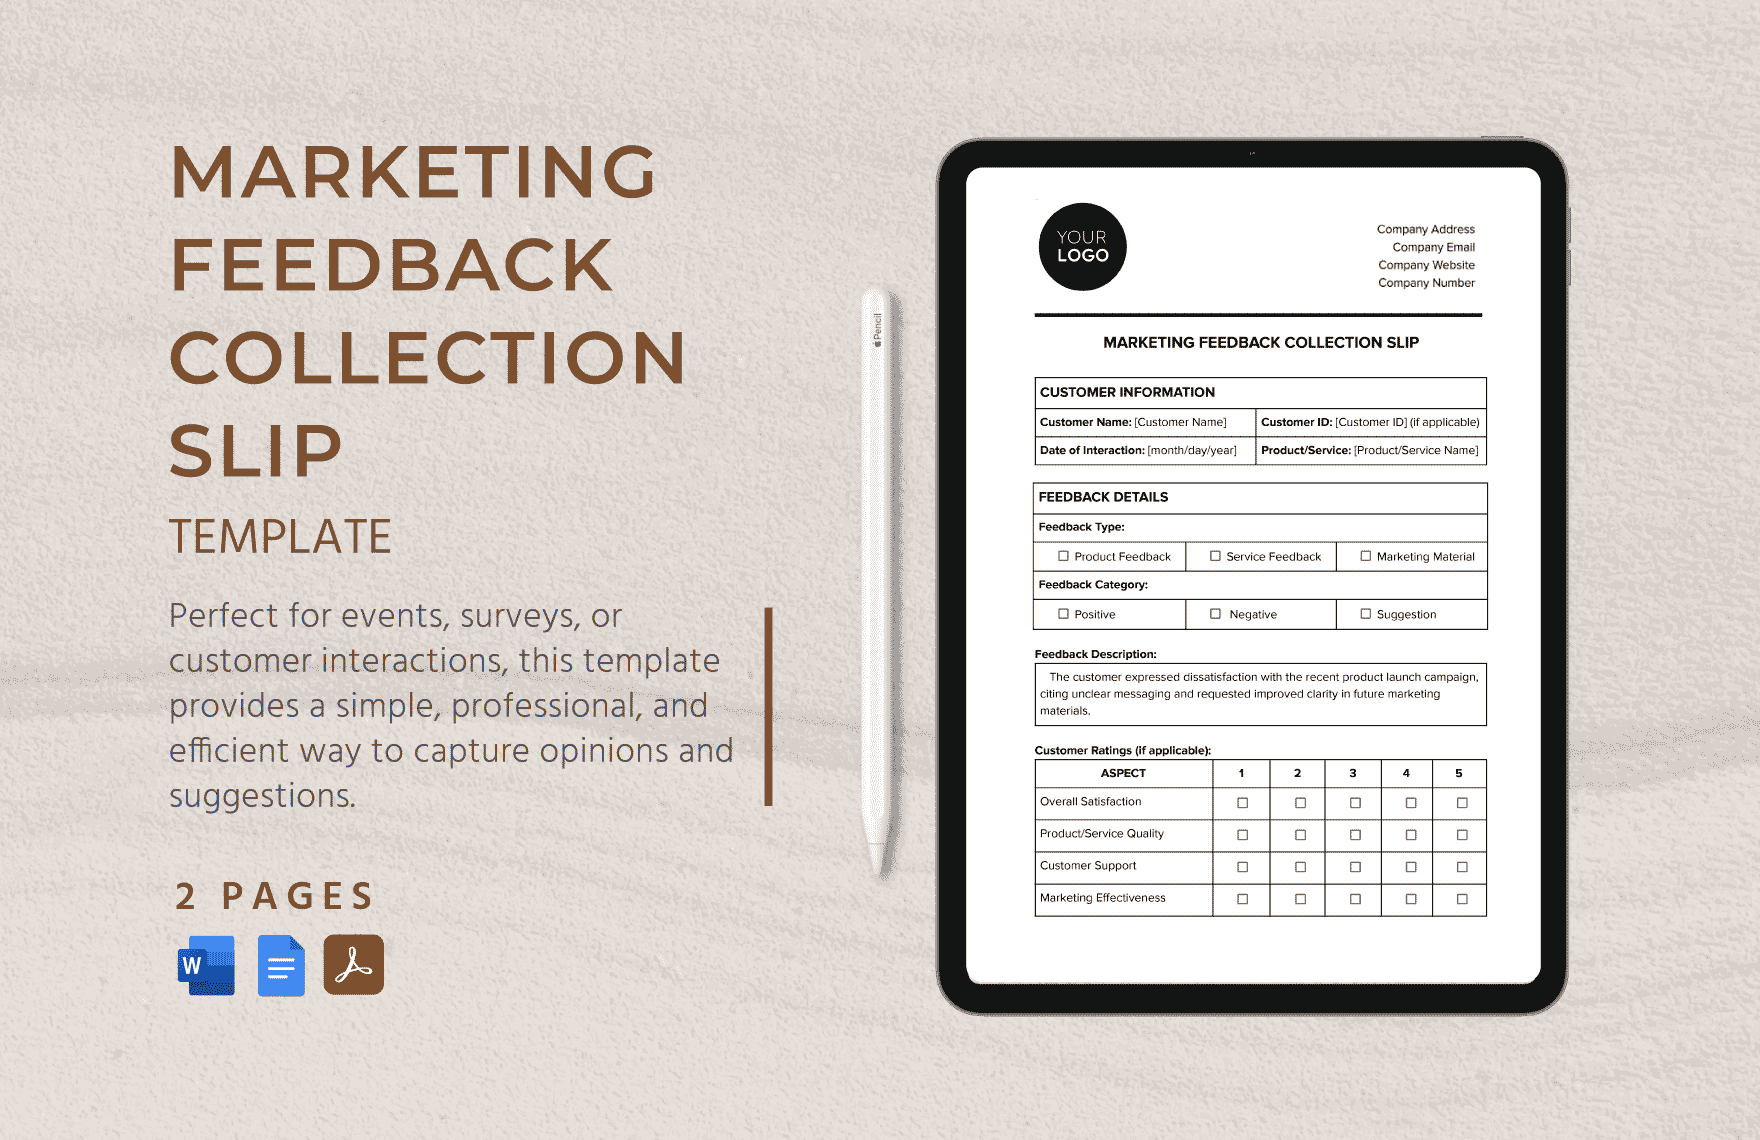 Marketing Feedback Collection Slip Template